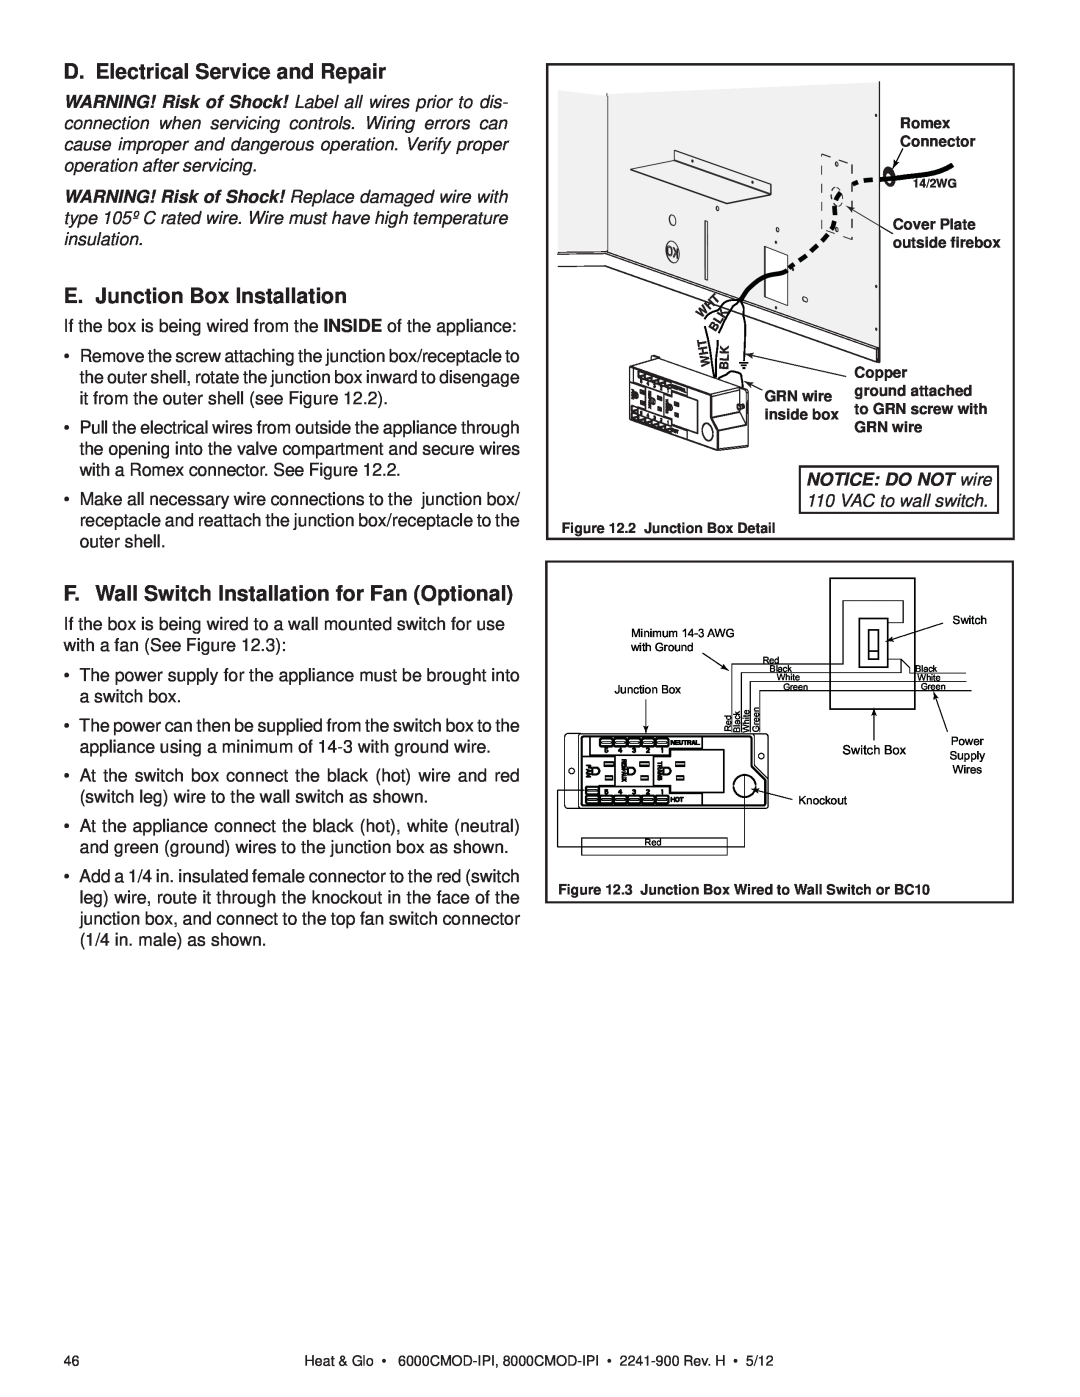 Heat & Glo LifeStyle 8000CMOD-IPI D. Electrical Service and Repair, E. Junction Box Installation, NOTICE: DO NOT wire 